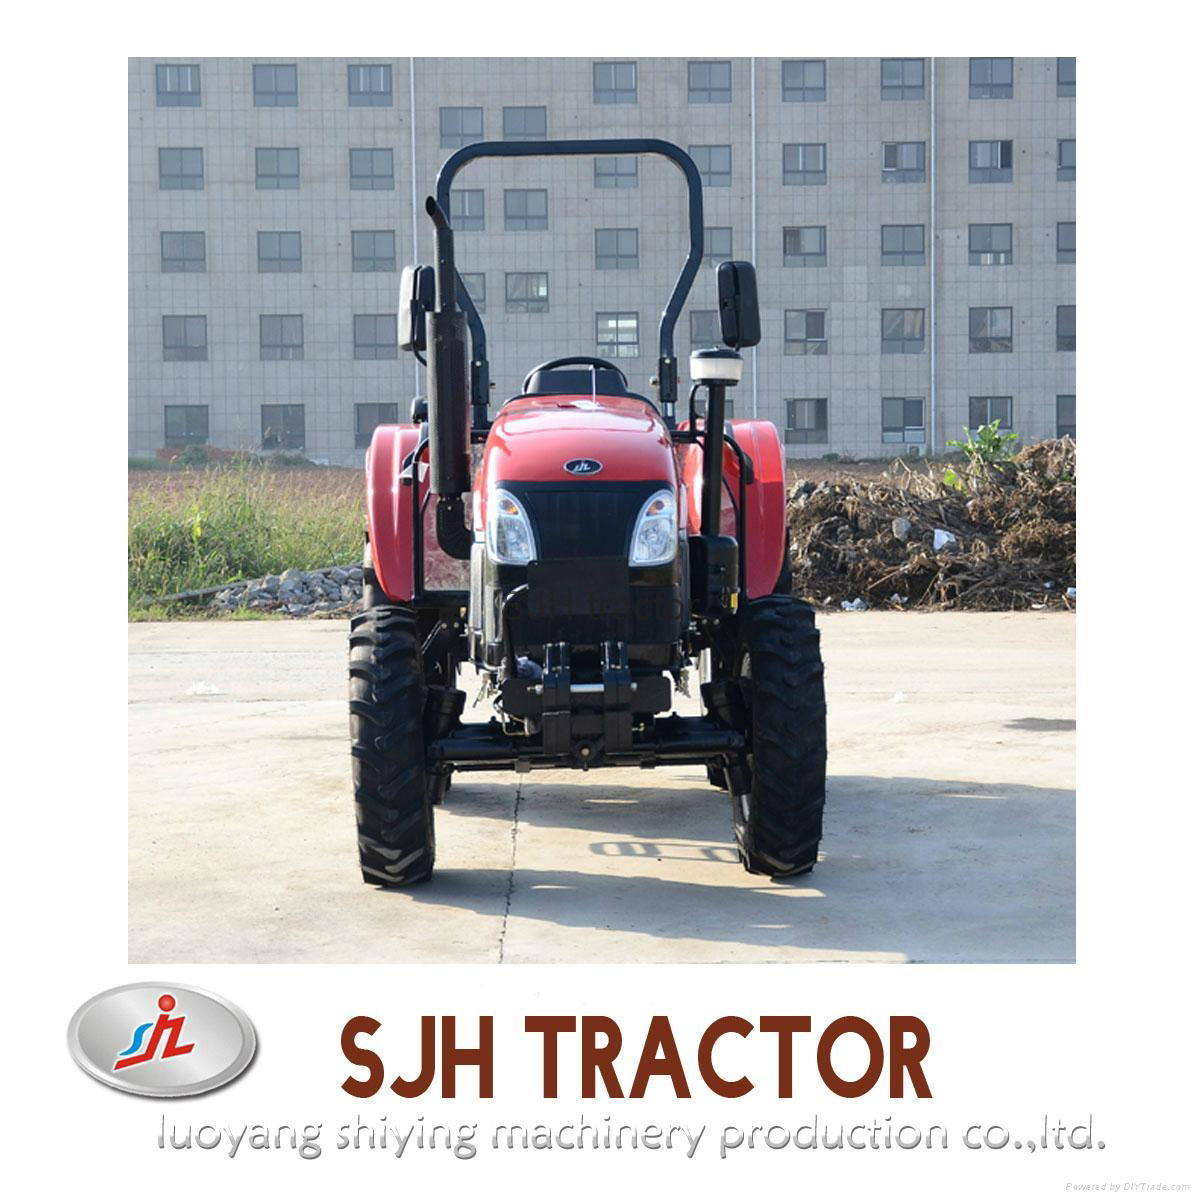 China SJH 55hp 4wd farming tractor mini tractor price list product list